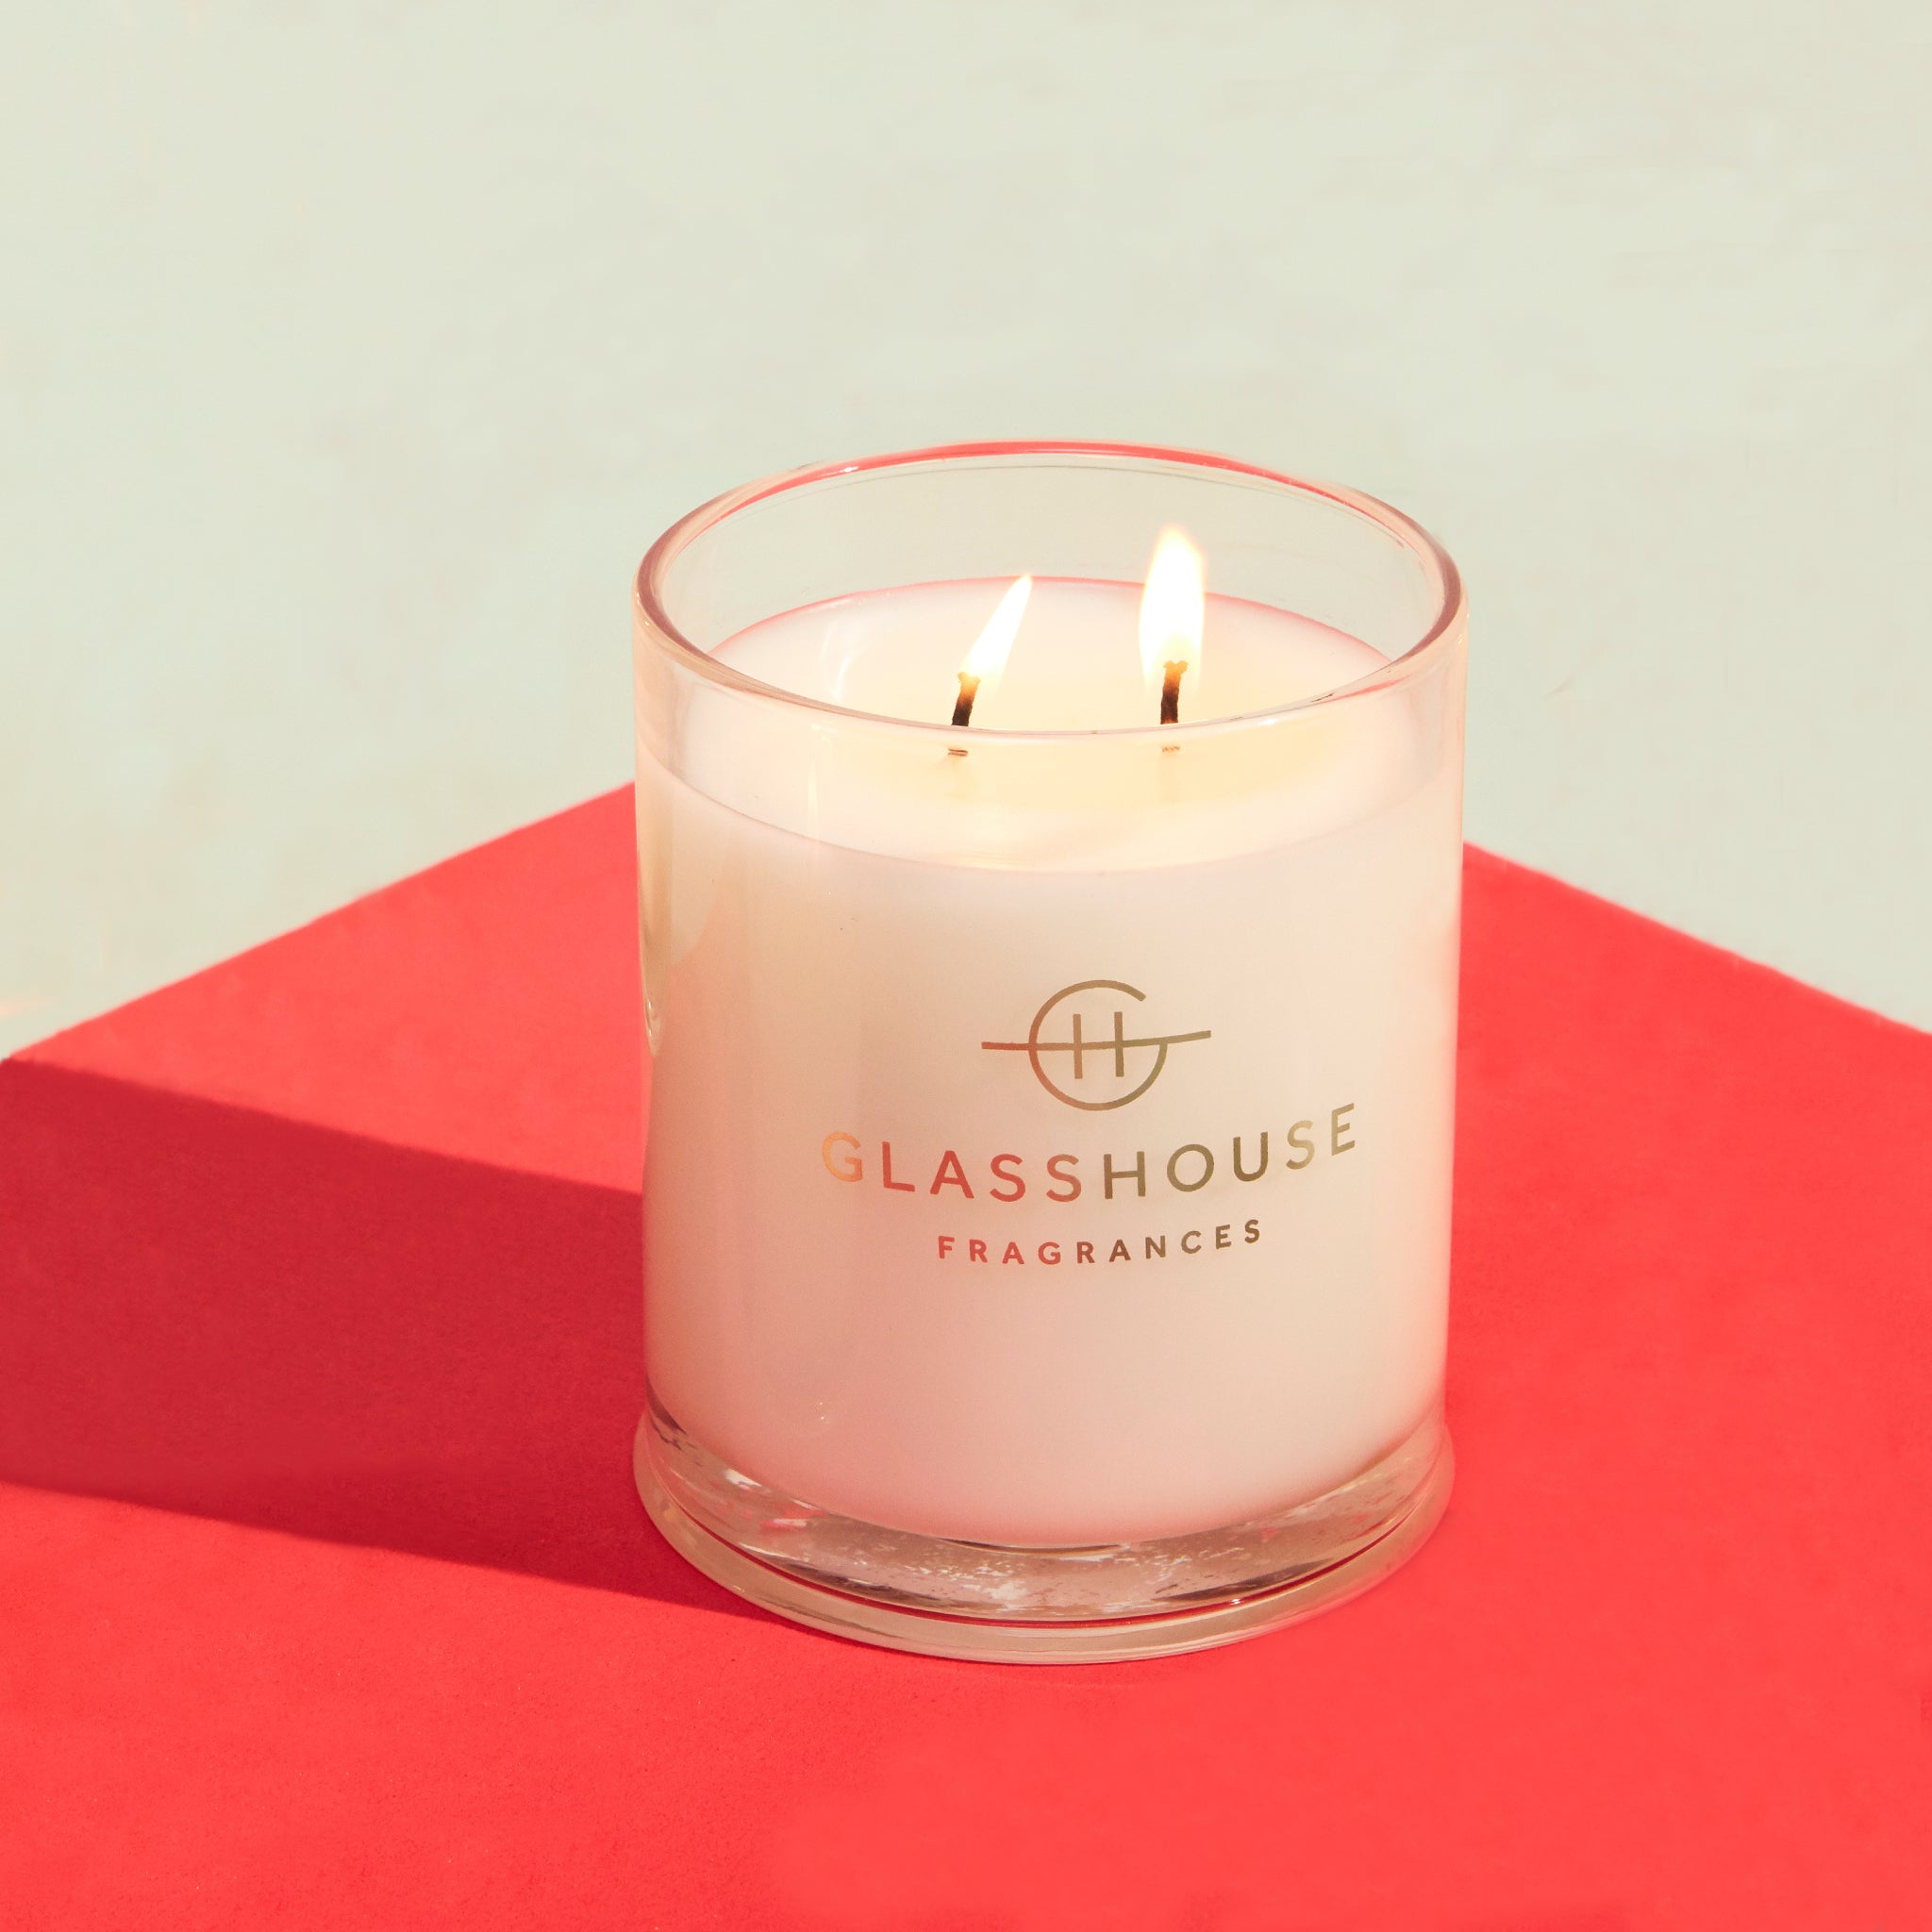 Glasshouse Fragrances soy candle burning on a red tabletop